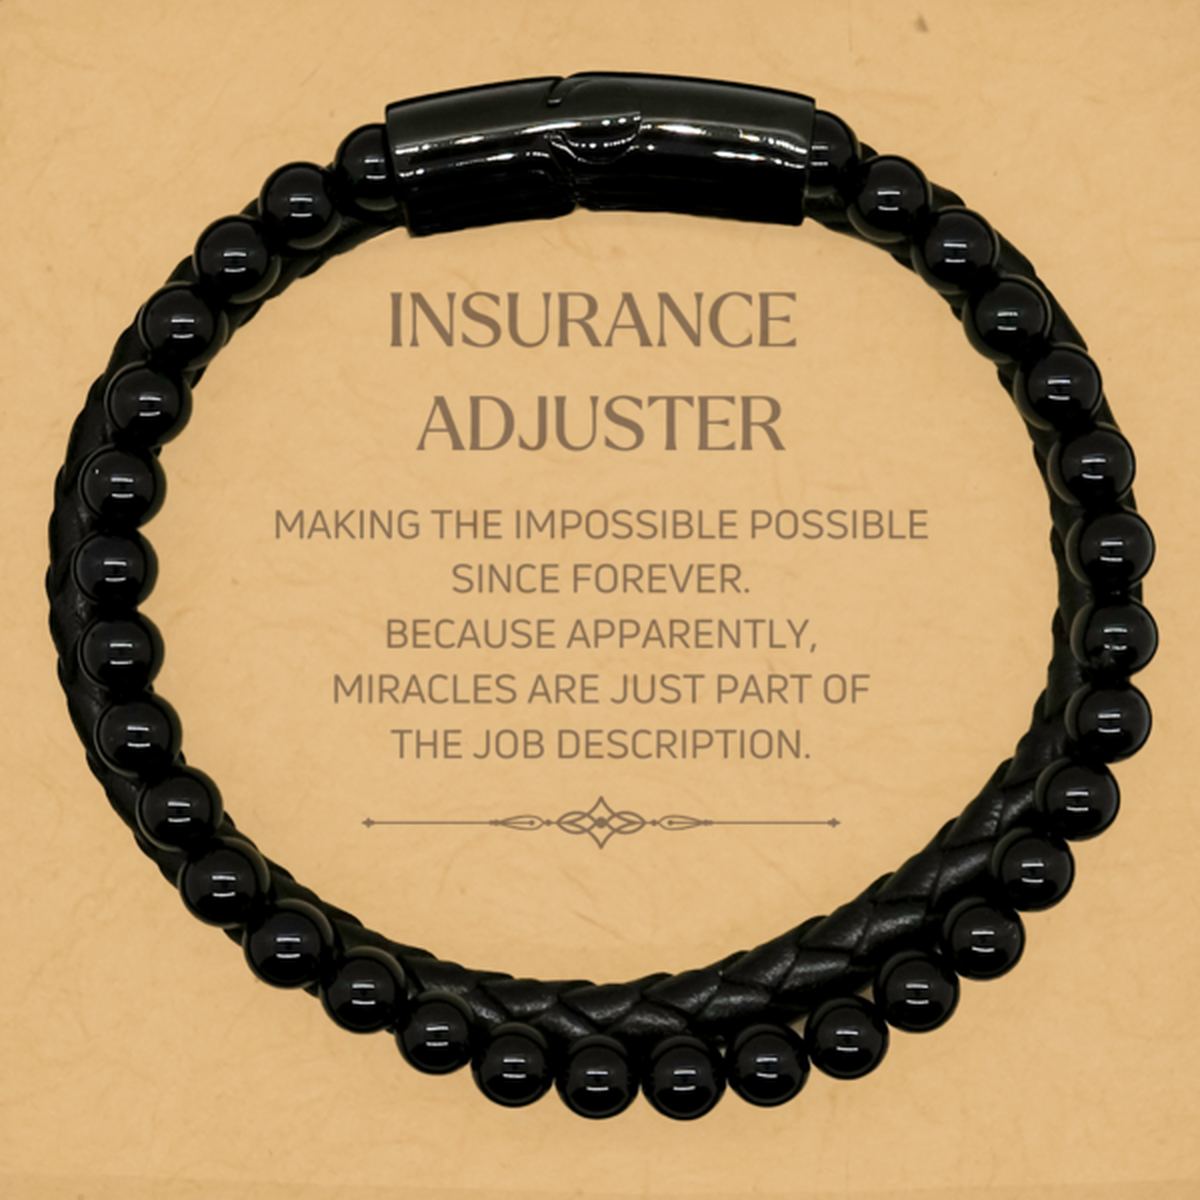 Funny Insurance Adjuster Gifts, Miracles are just part of the job description, Inspirational Birthday Stone Leather Bracelets For Insurance Adjuster, Men, Women, Coworkers, Friends, Boss